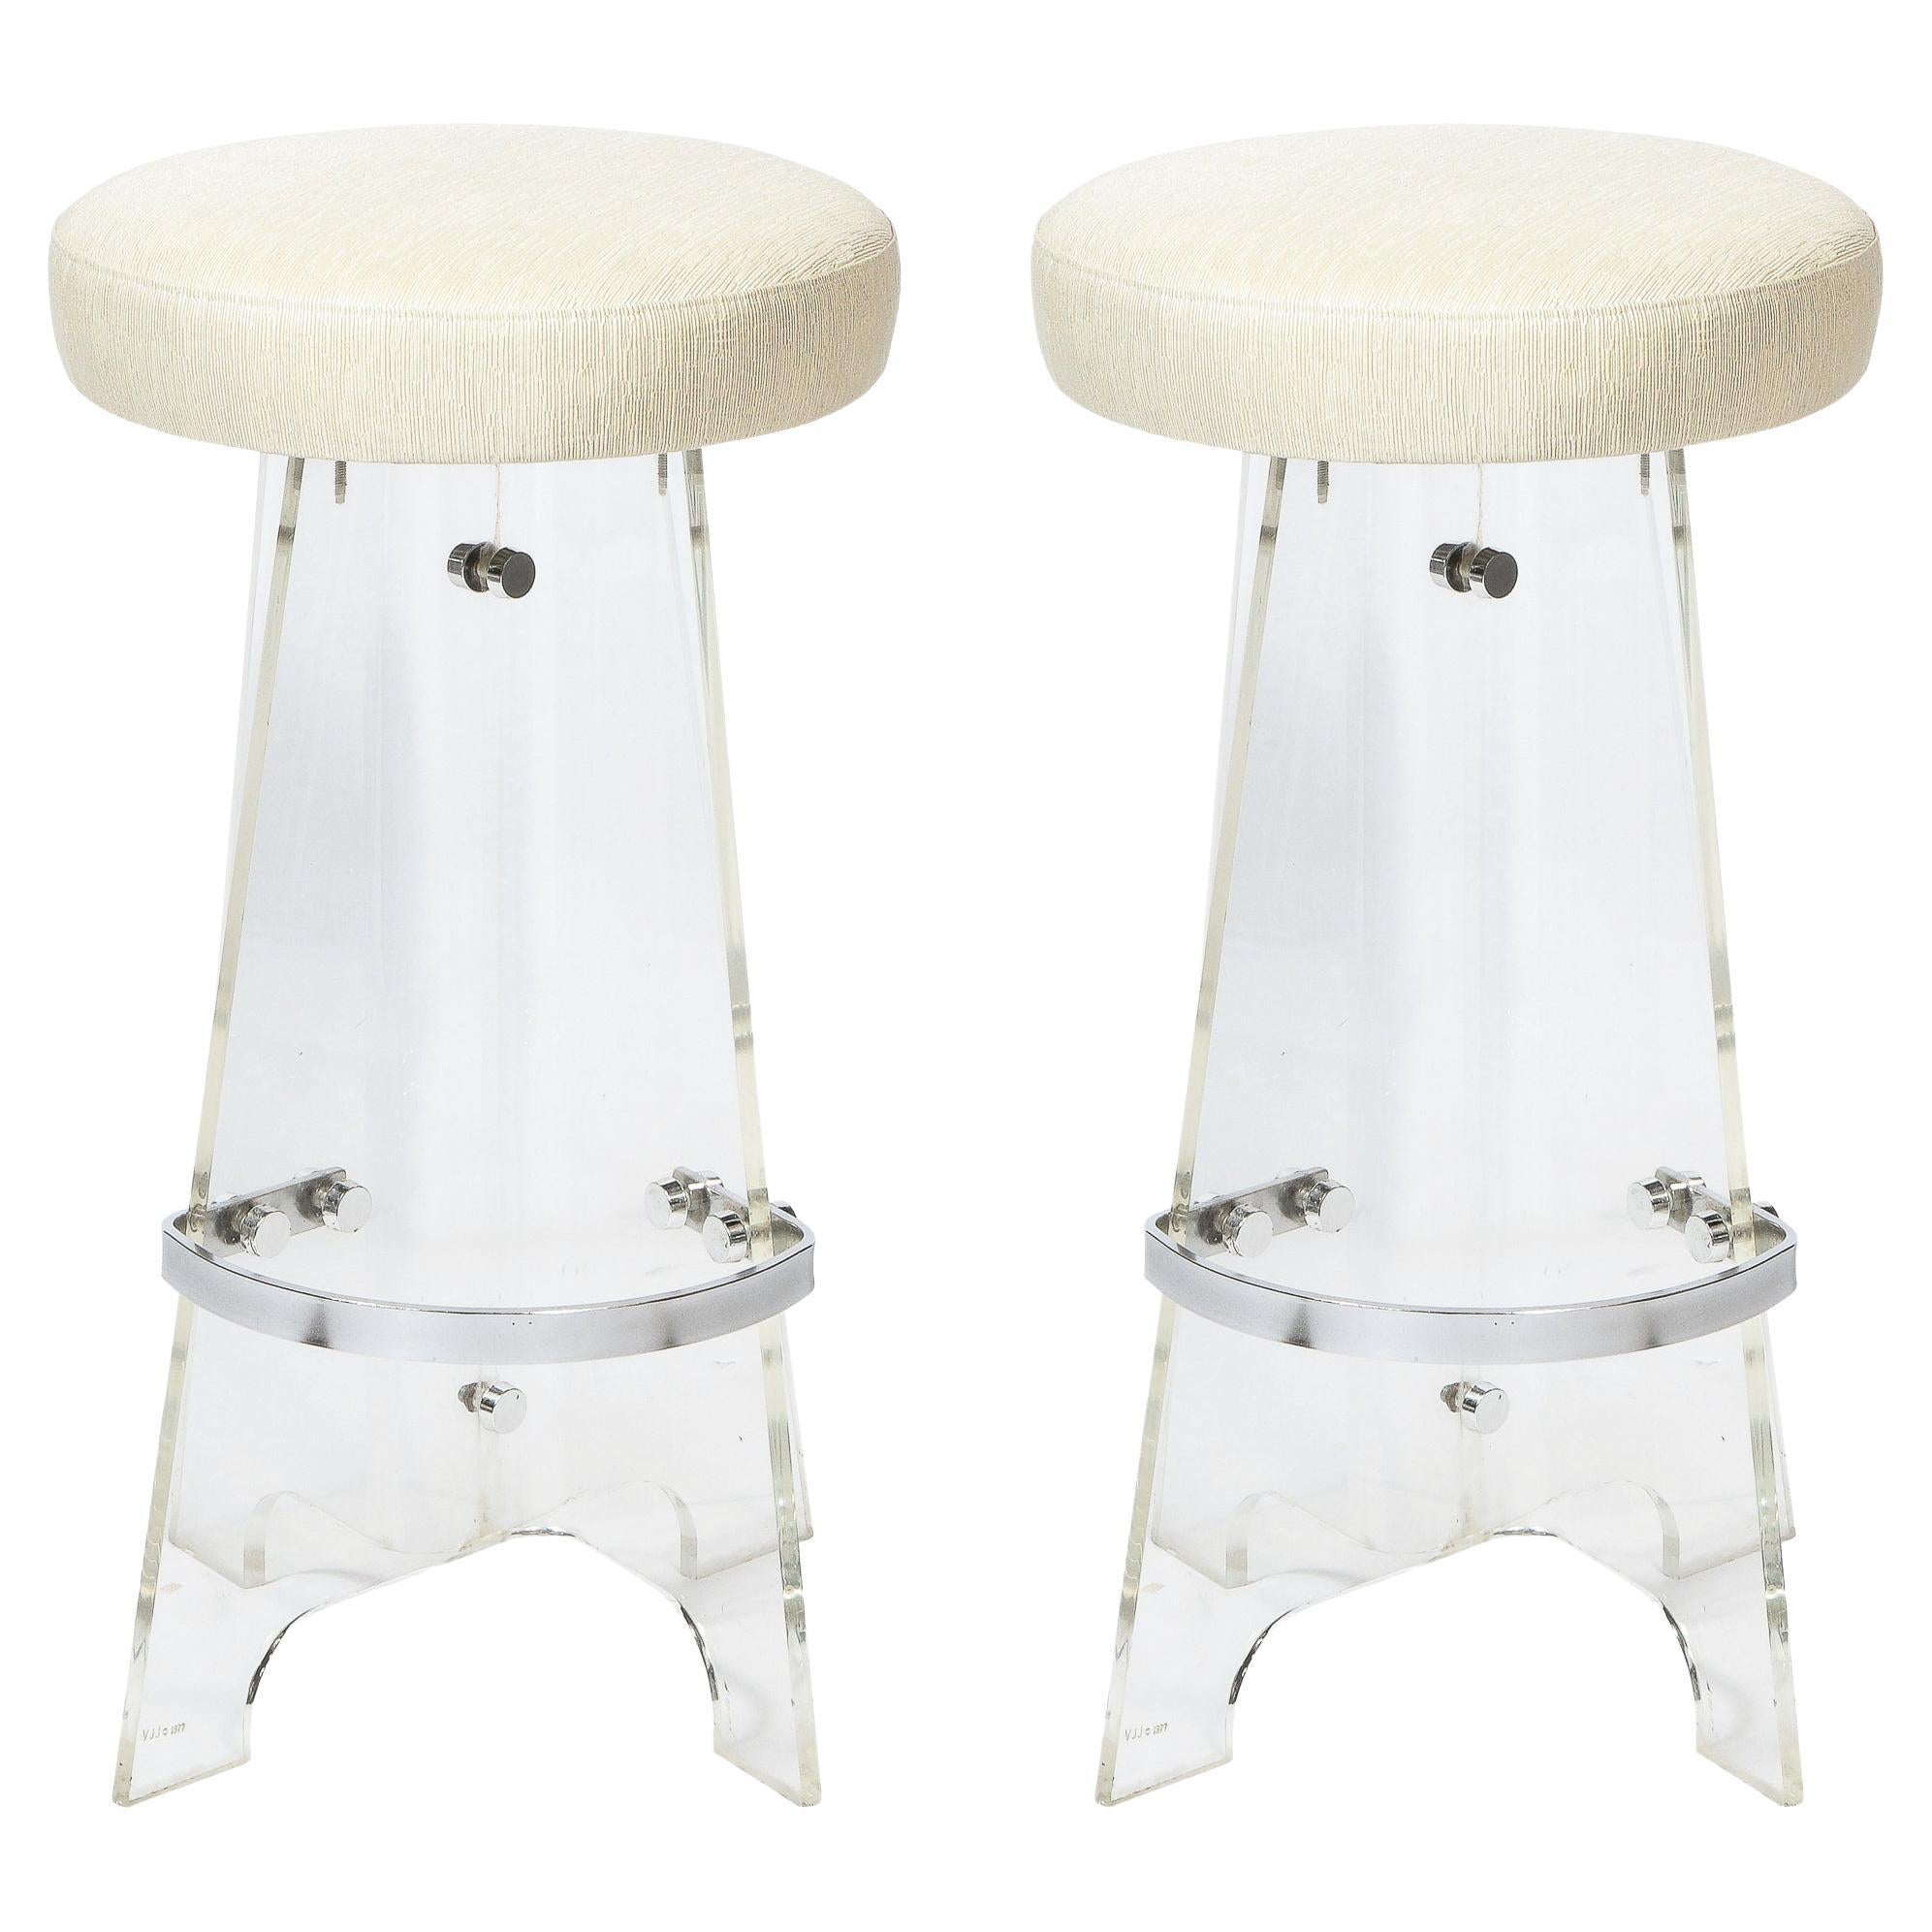 Pair of Mid-Century Modern Lucite, Chrome Bar Stools in Holly Hunt Upholstery For Sale